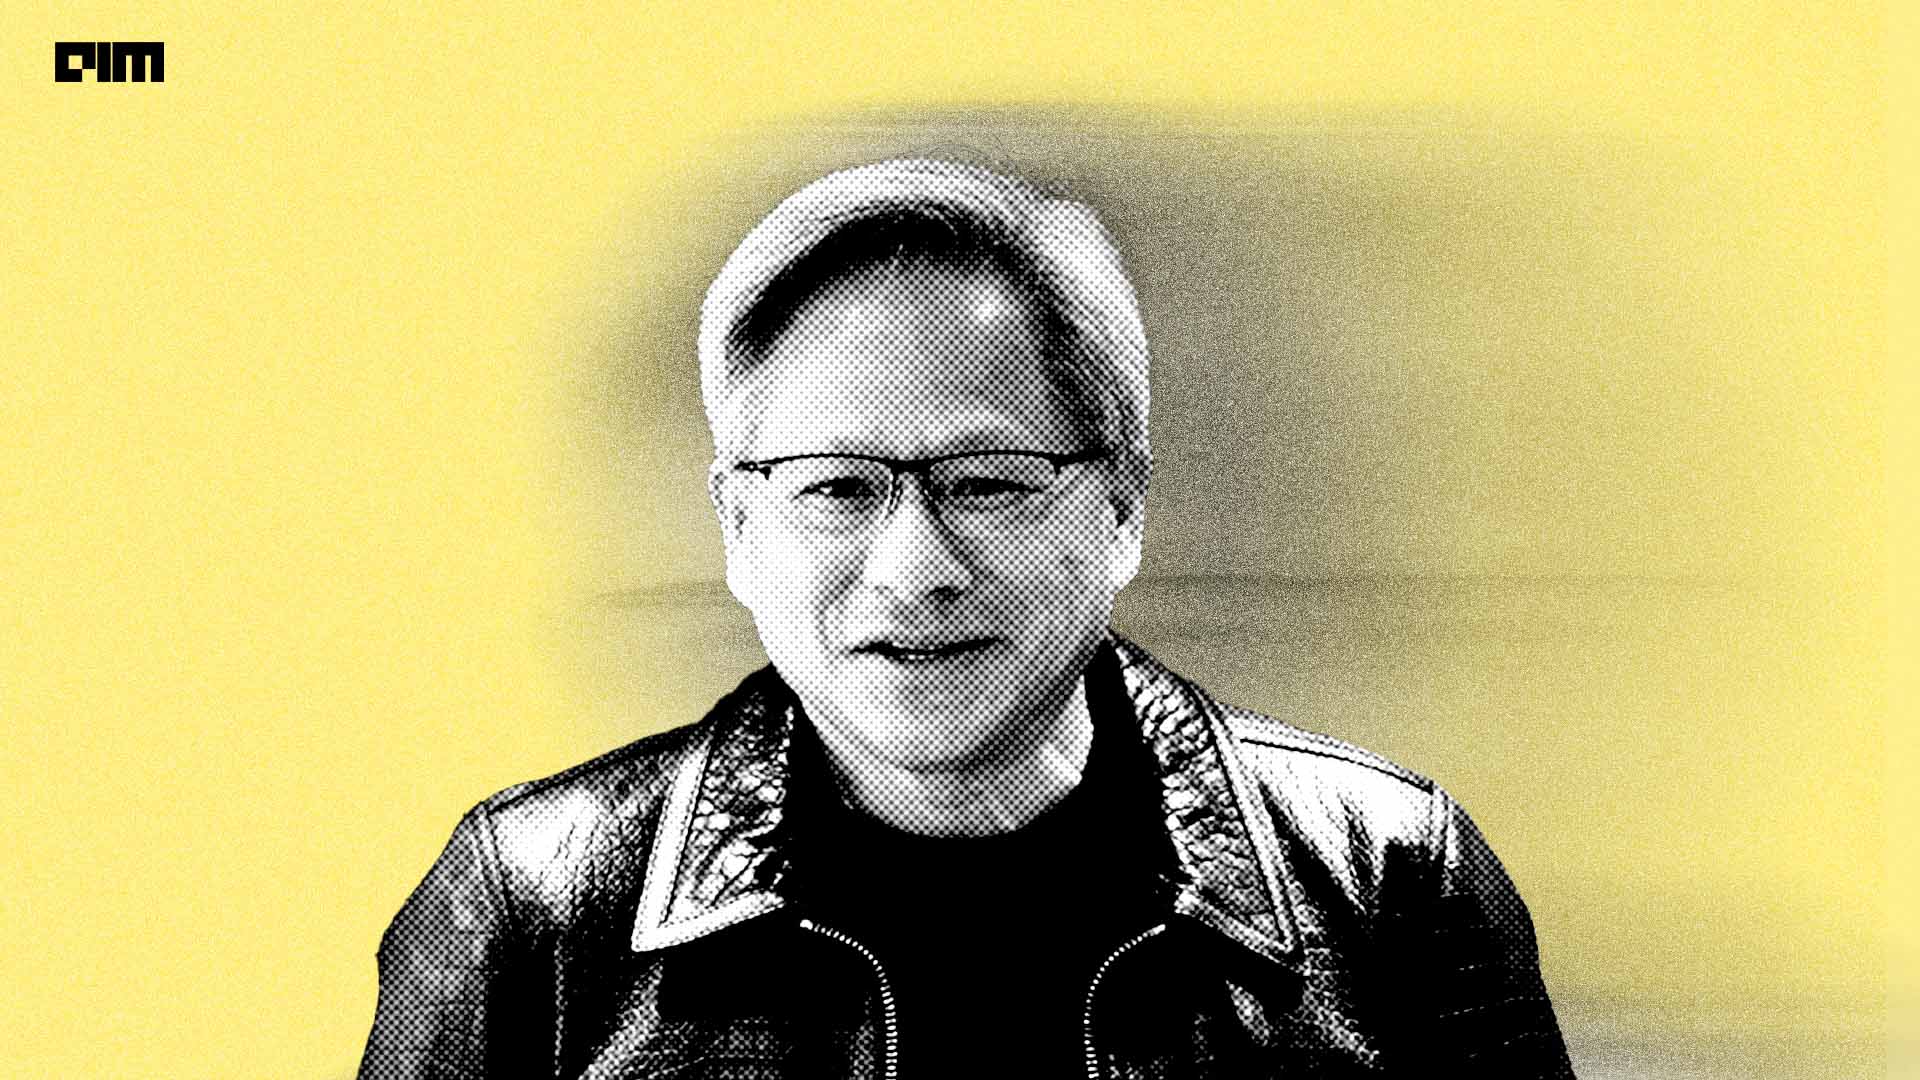 NVIDIA Chief Jensen Huang to Visit India in October